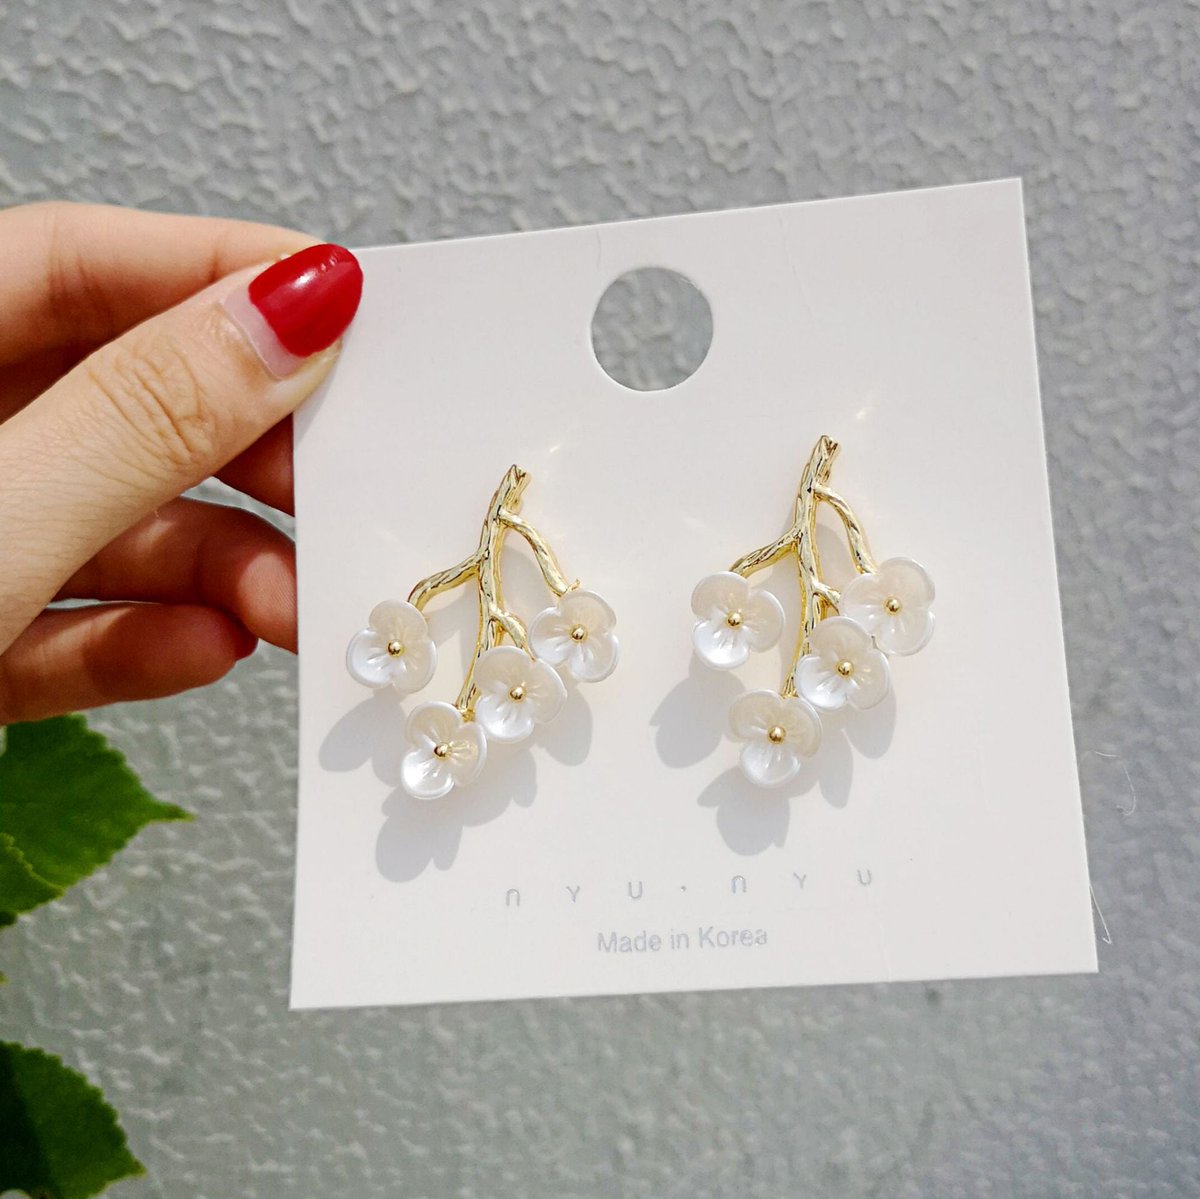 Beautifully crafted earrings that you'll love.
shopuntilhappy.com/products/pearl…

#jewelrymagazine #jewelryremake #jewelrydesig #earringrack #resinearrings #earringcharm #earringcard